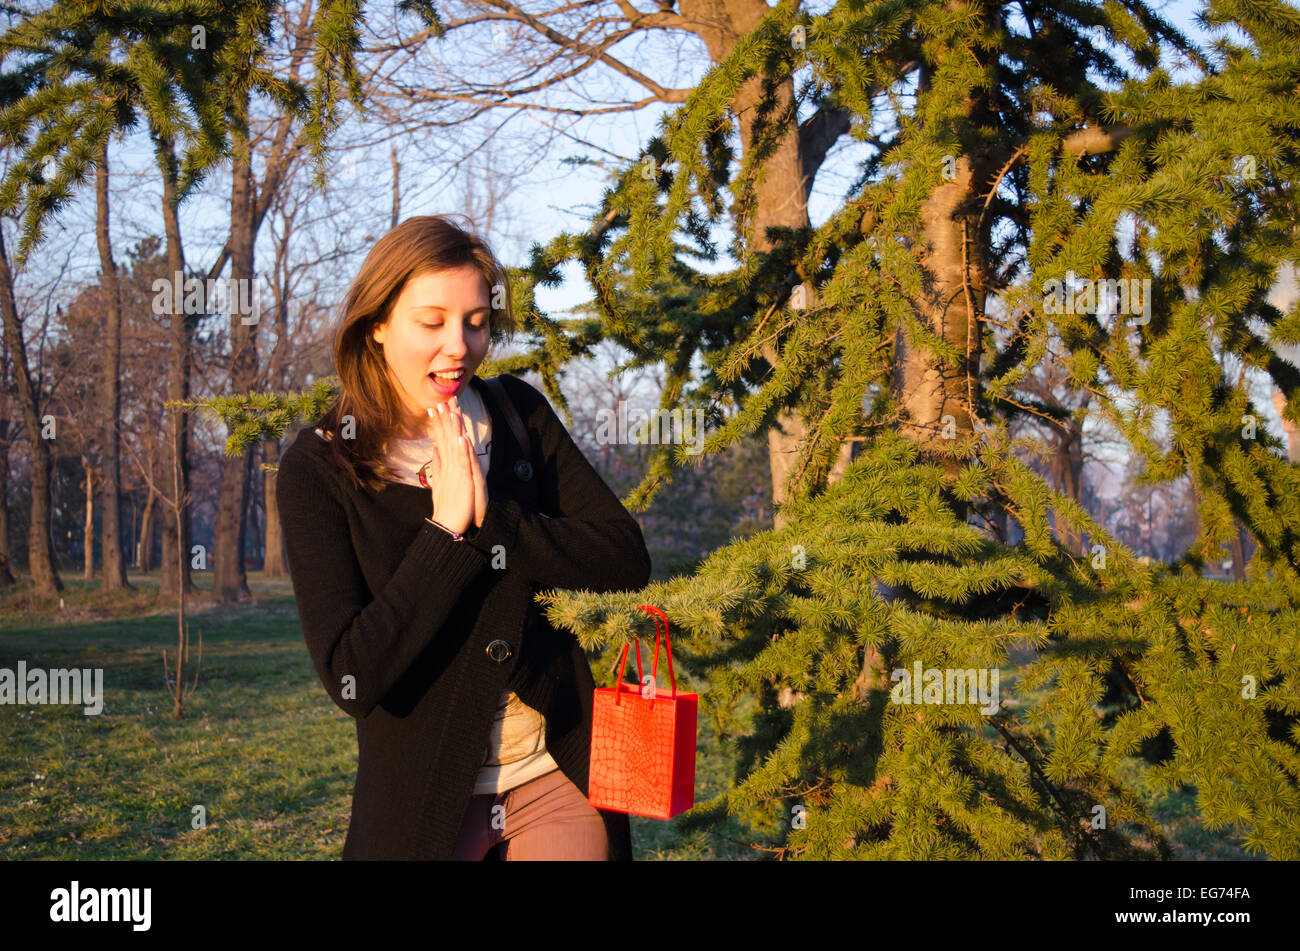 Brunette finding her Valentine's gift on a tree in a park Stock Photo